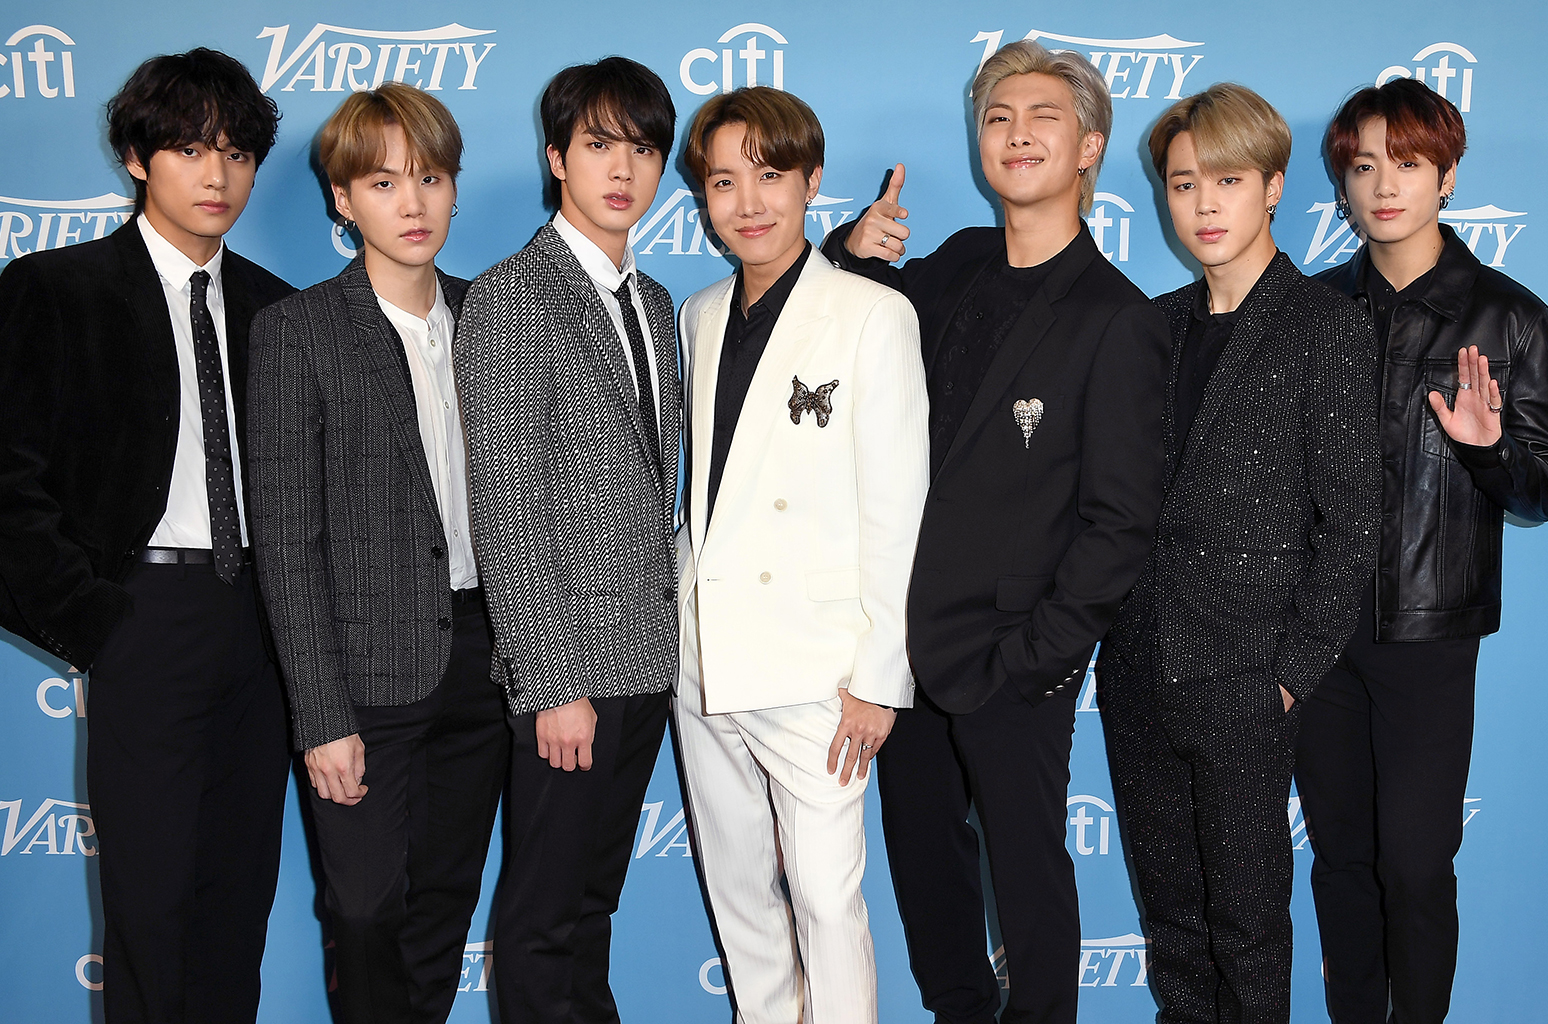 iHeartRadio Announces BTS Live Show Ahead of 'Map of the Soul: 7' Release